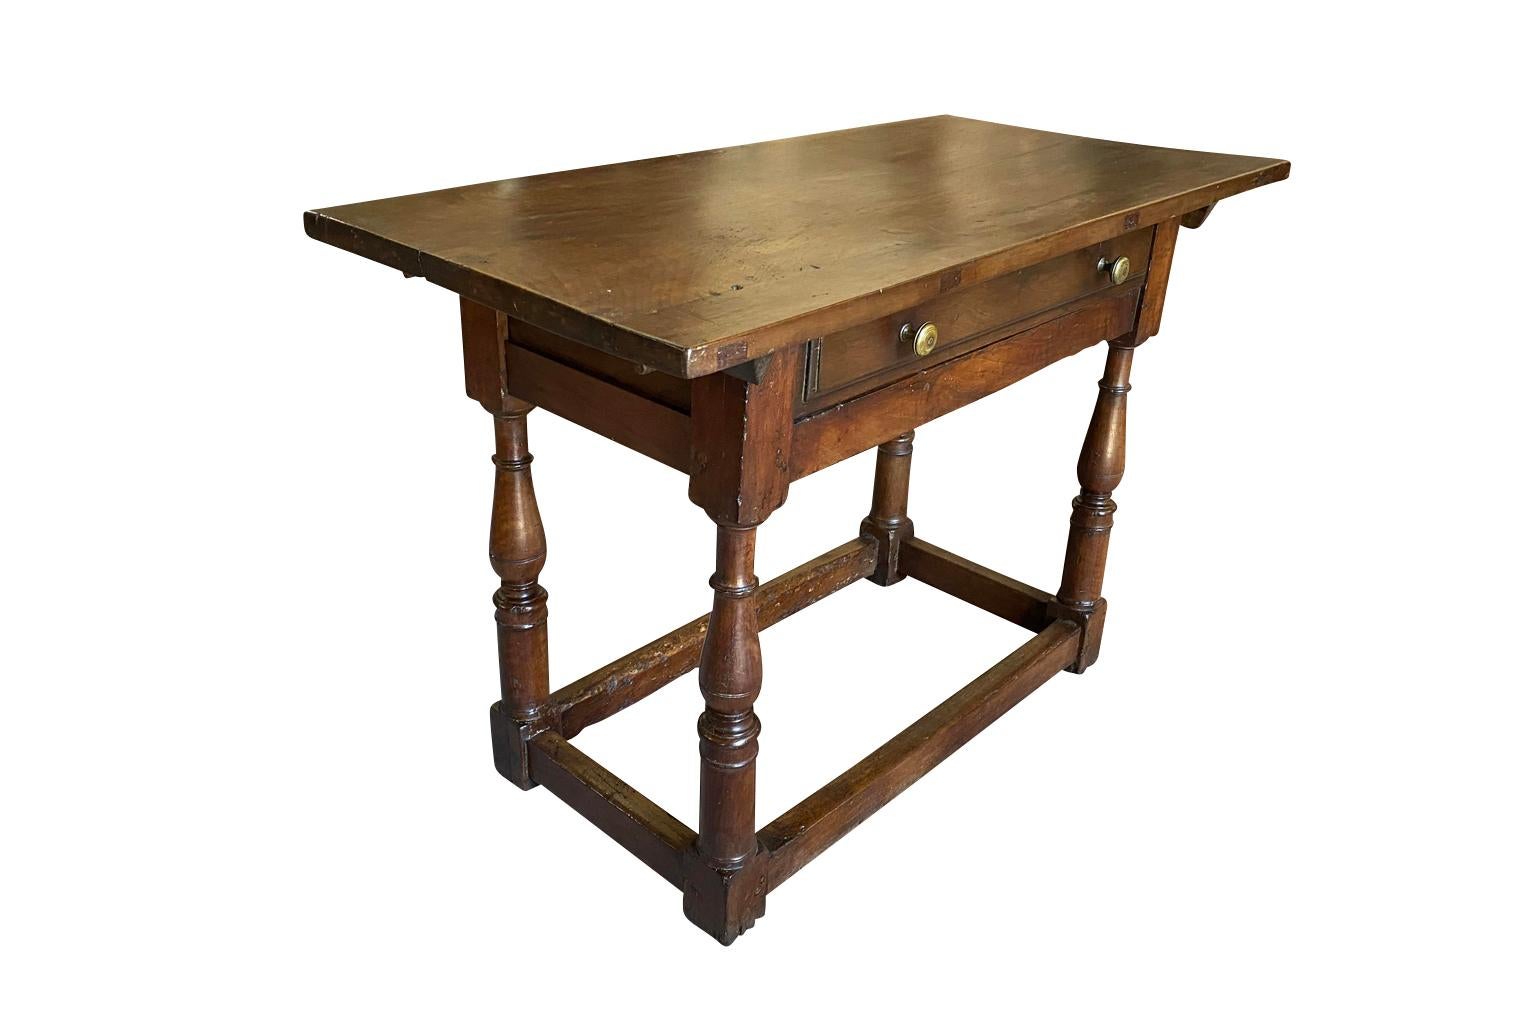 A very lovely early 19th century diminutive console or side table from the Bologna region of Italy. Wonderfully constructed from stunning walnut with a single drawer and nicely turned legs. Beautiful patina.